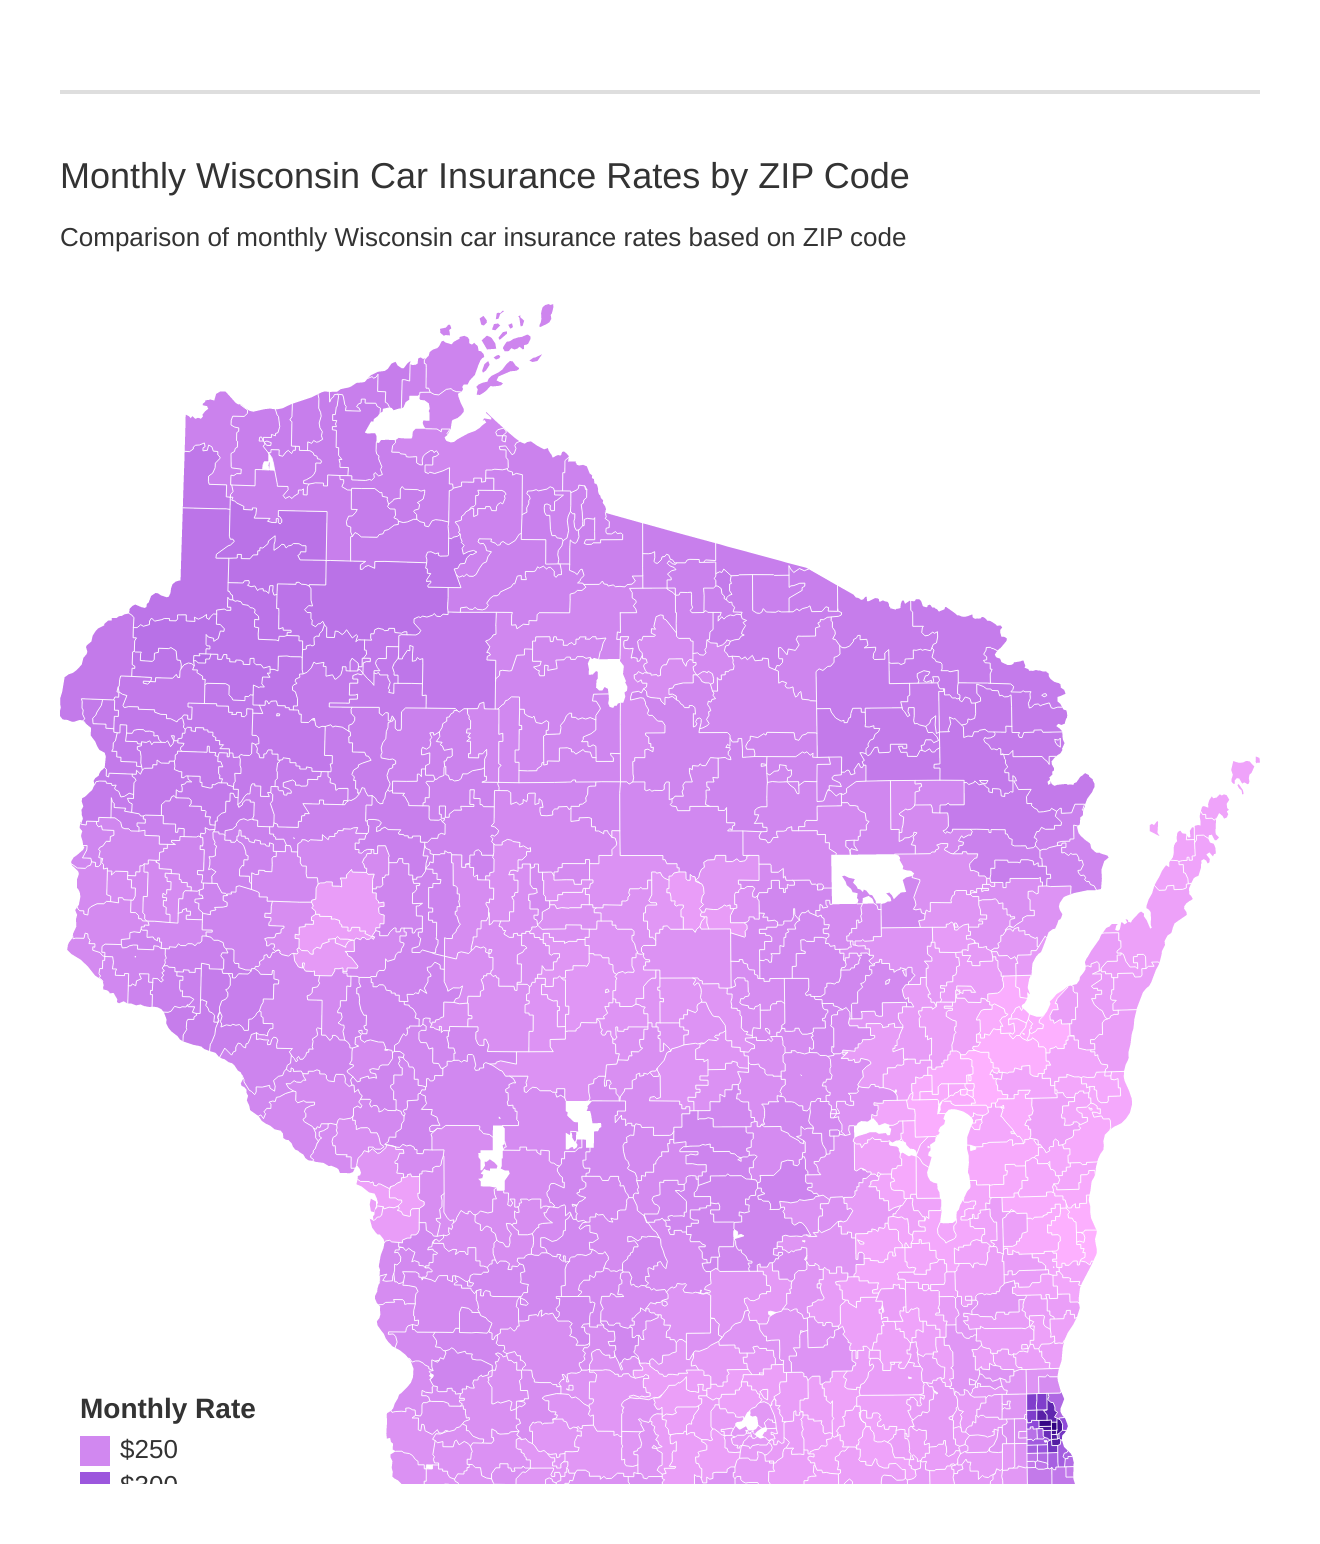 Monthly Wisconsin Car Insurance Rates by ZIP Code